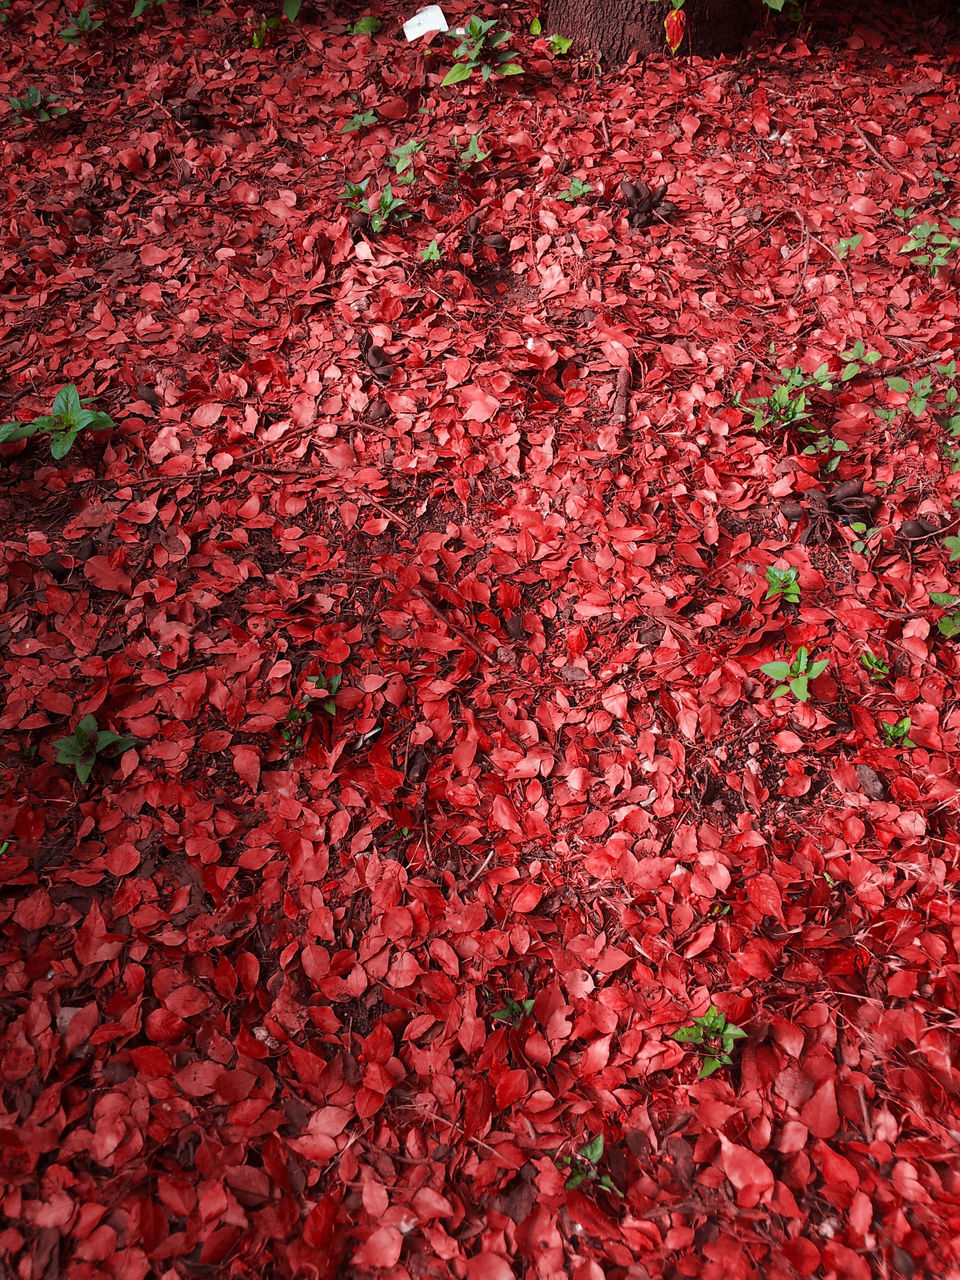 HIGH ANGLE VIEW OF RED FLOWERING PLANTS